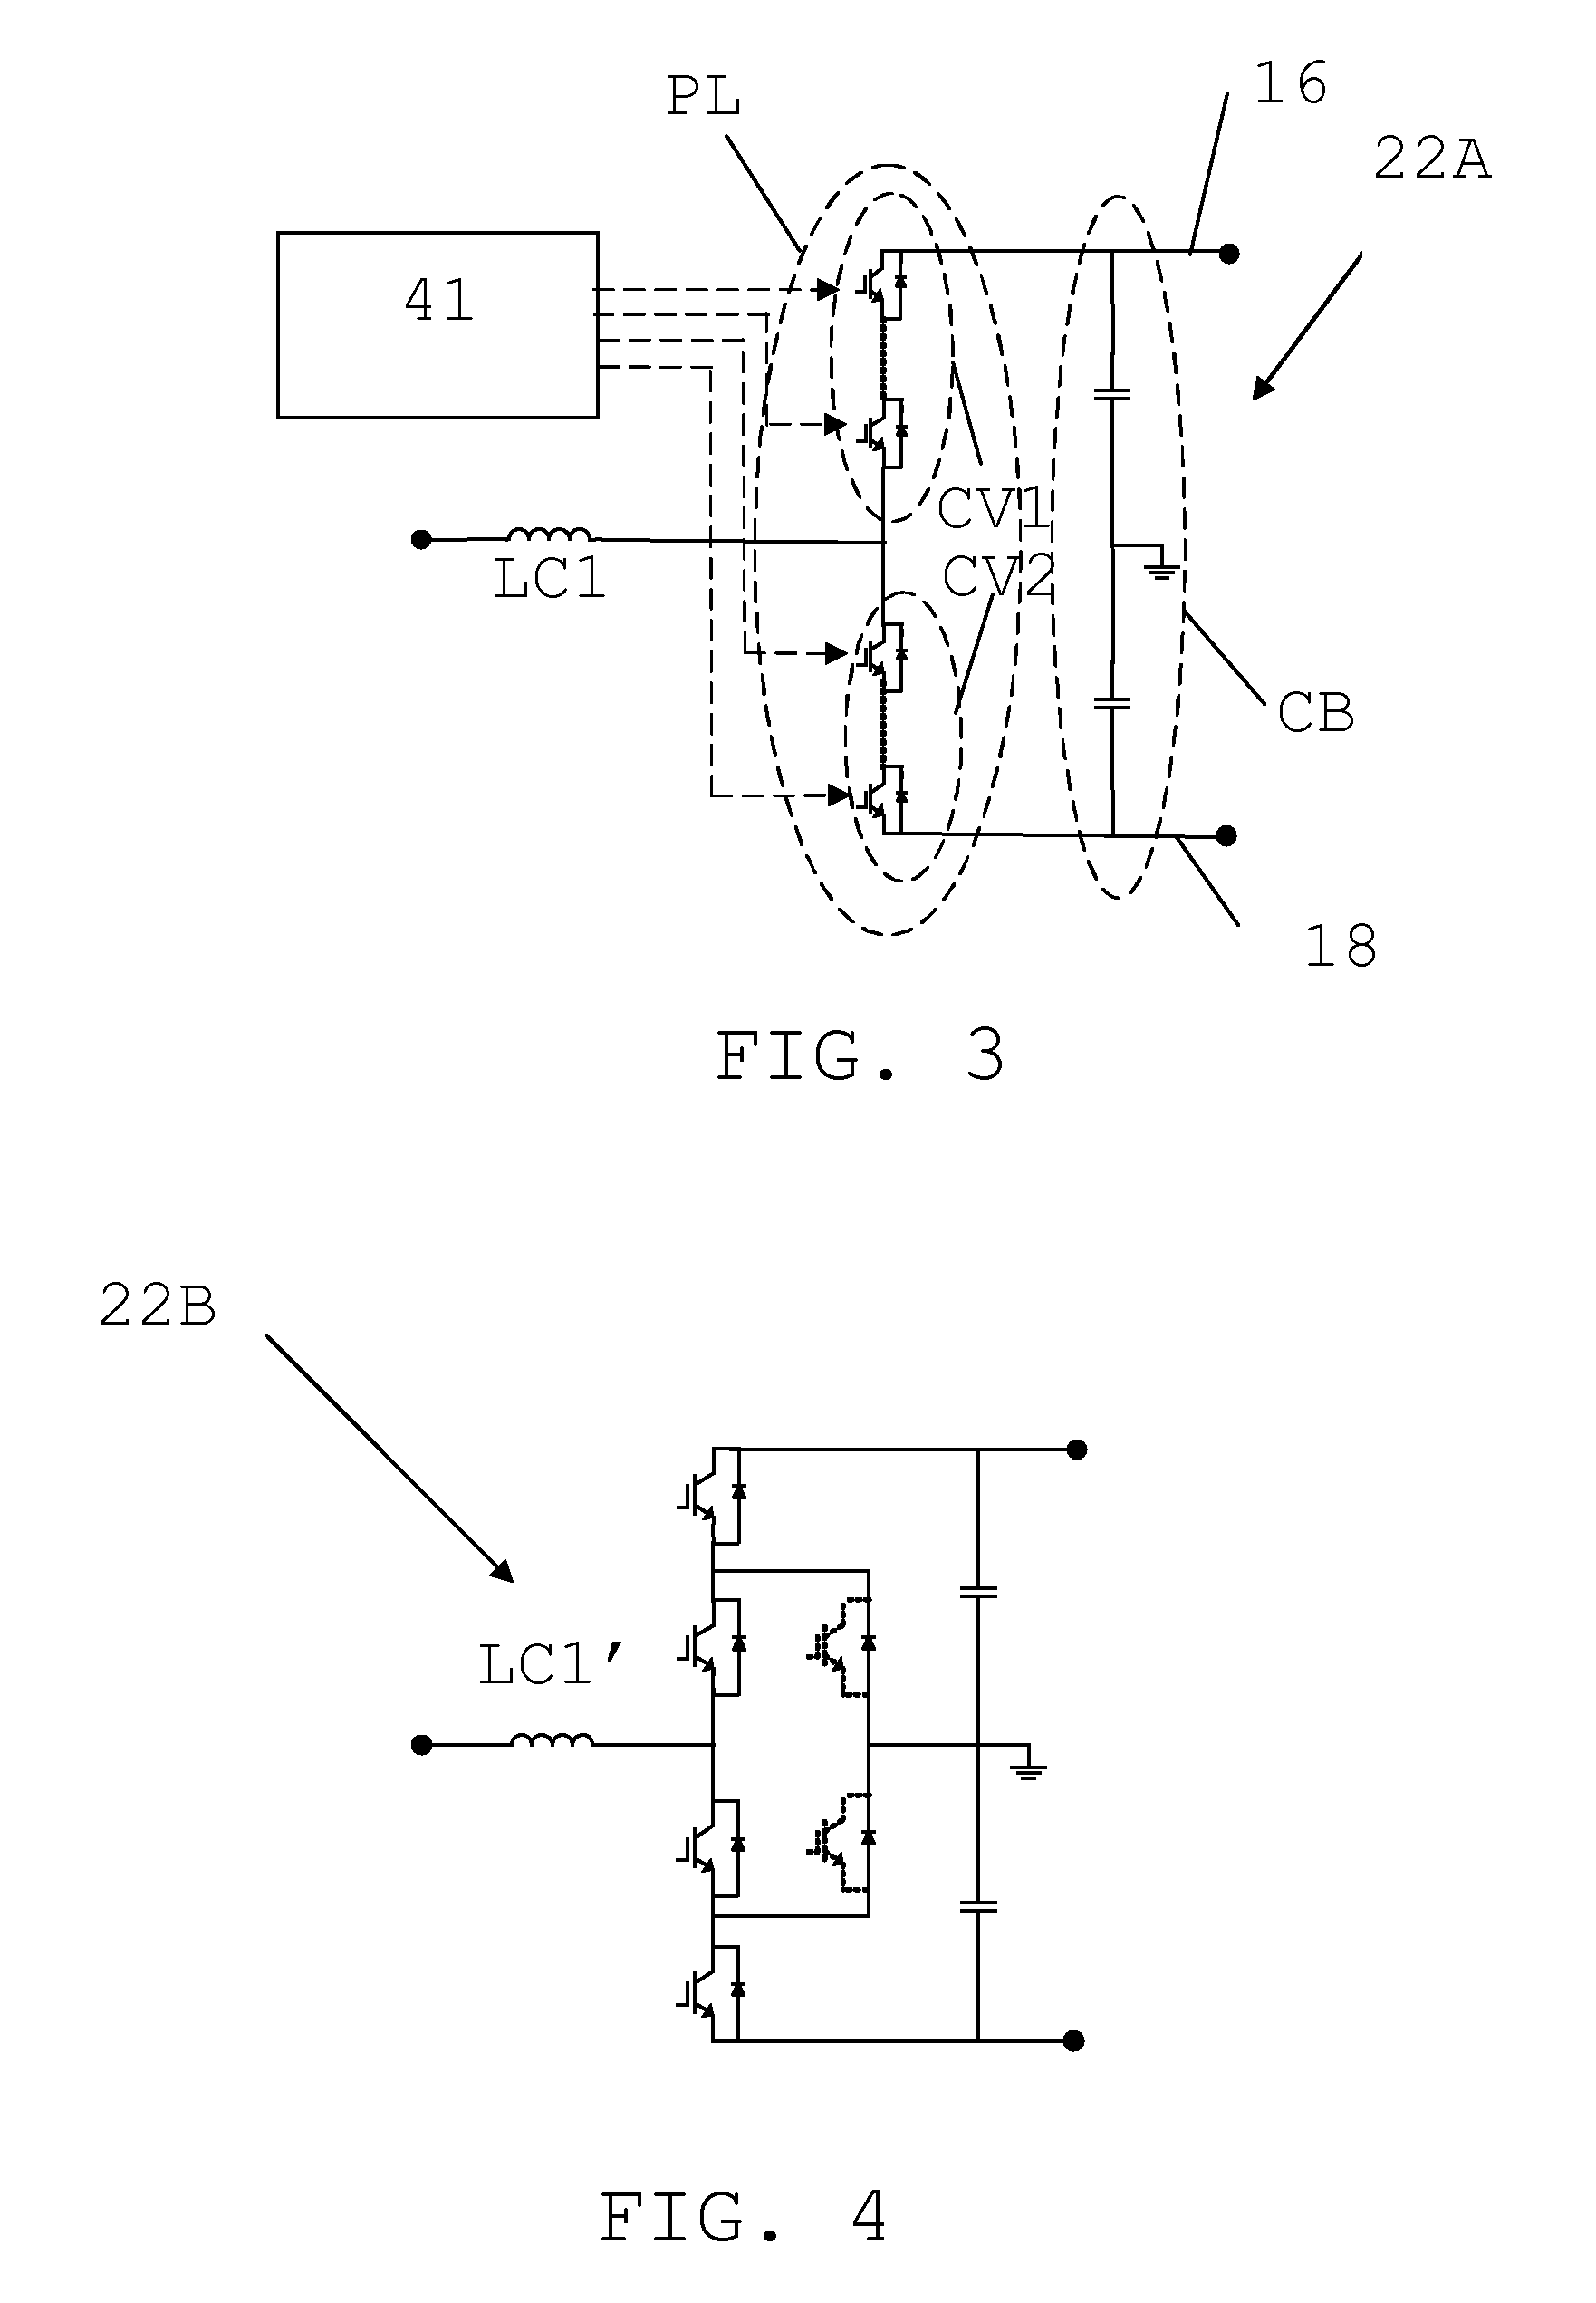 Interface arrangement between ac and DC systems using grounding switch